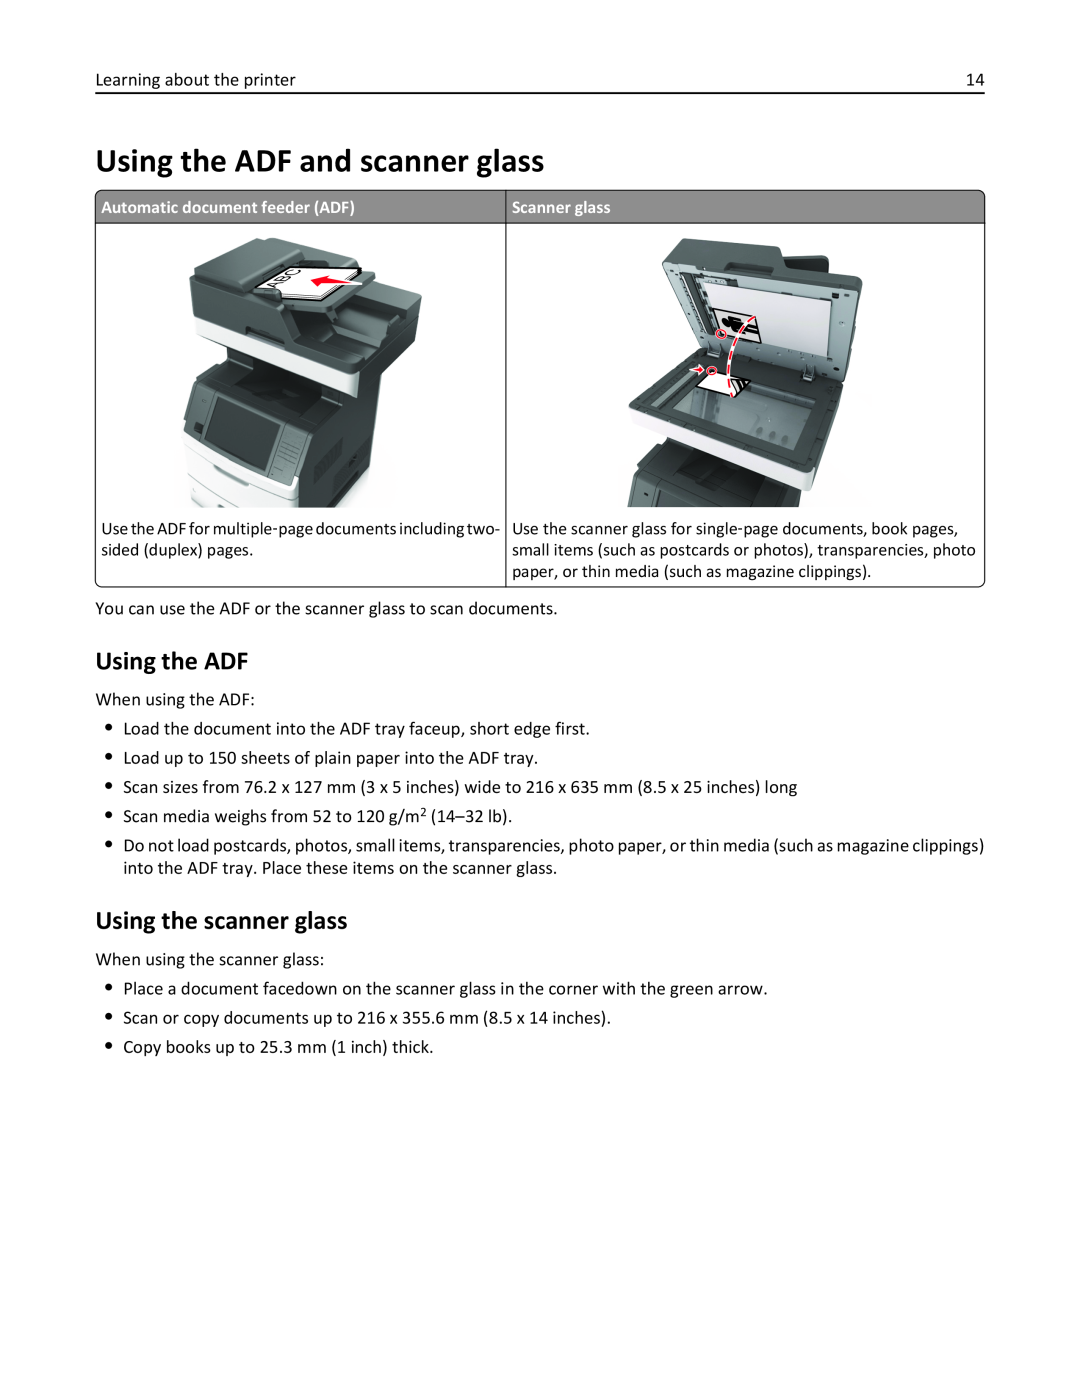 Lexmark 037, MX710DHE, 24T7310, 237 manual Using the ADF and scanner glass, Using the scanner glass 